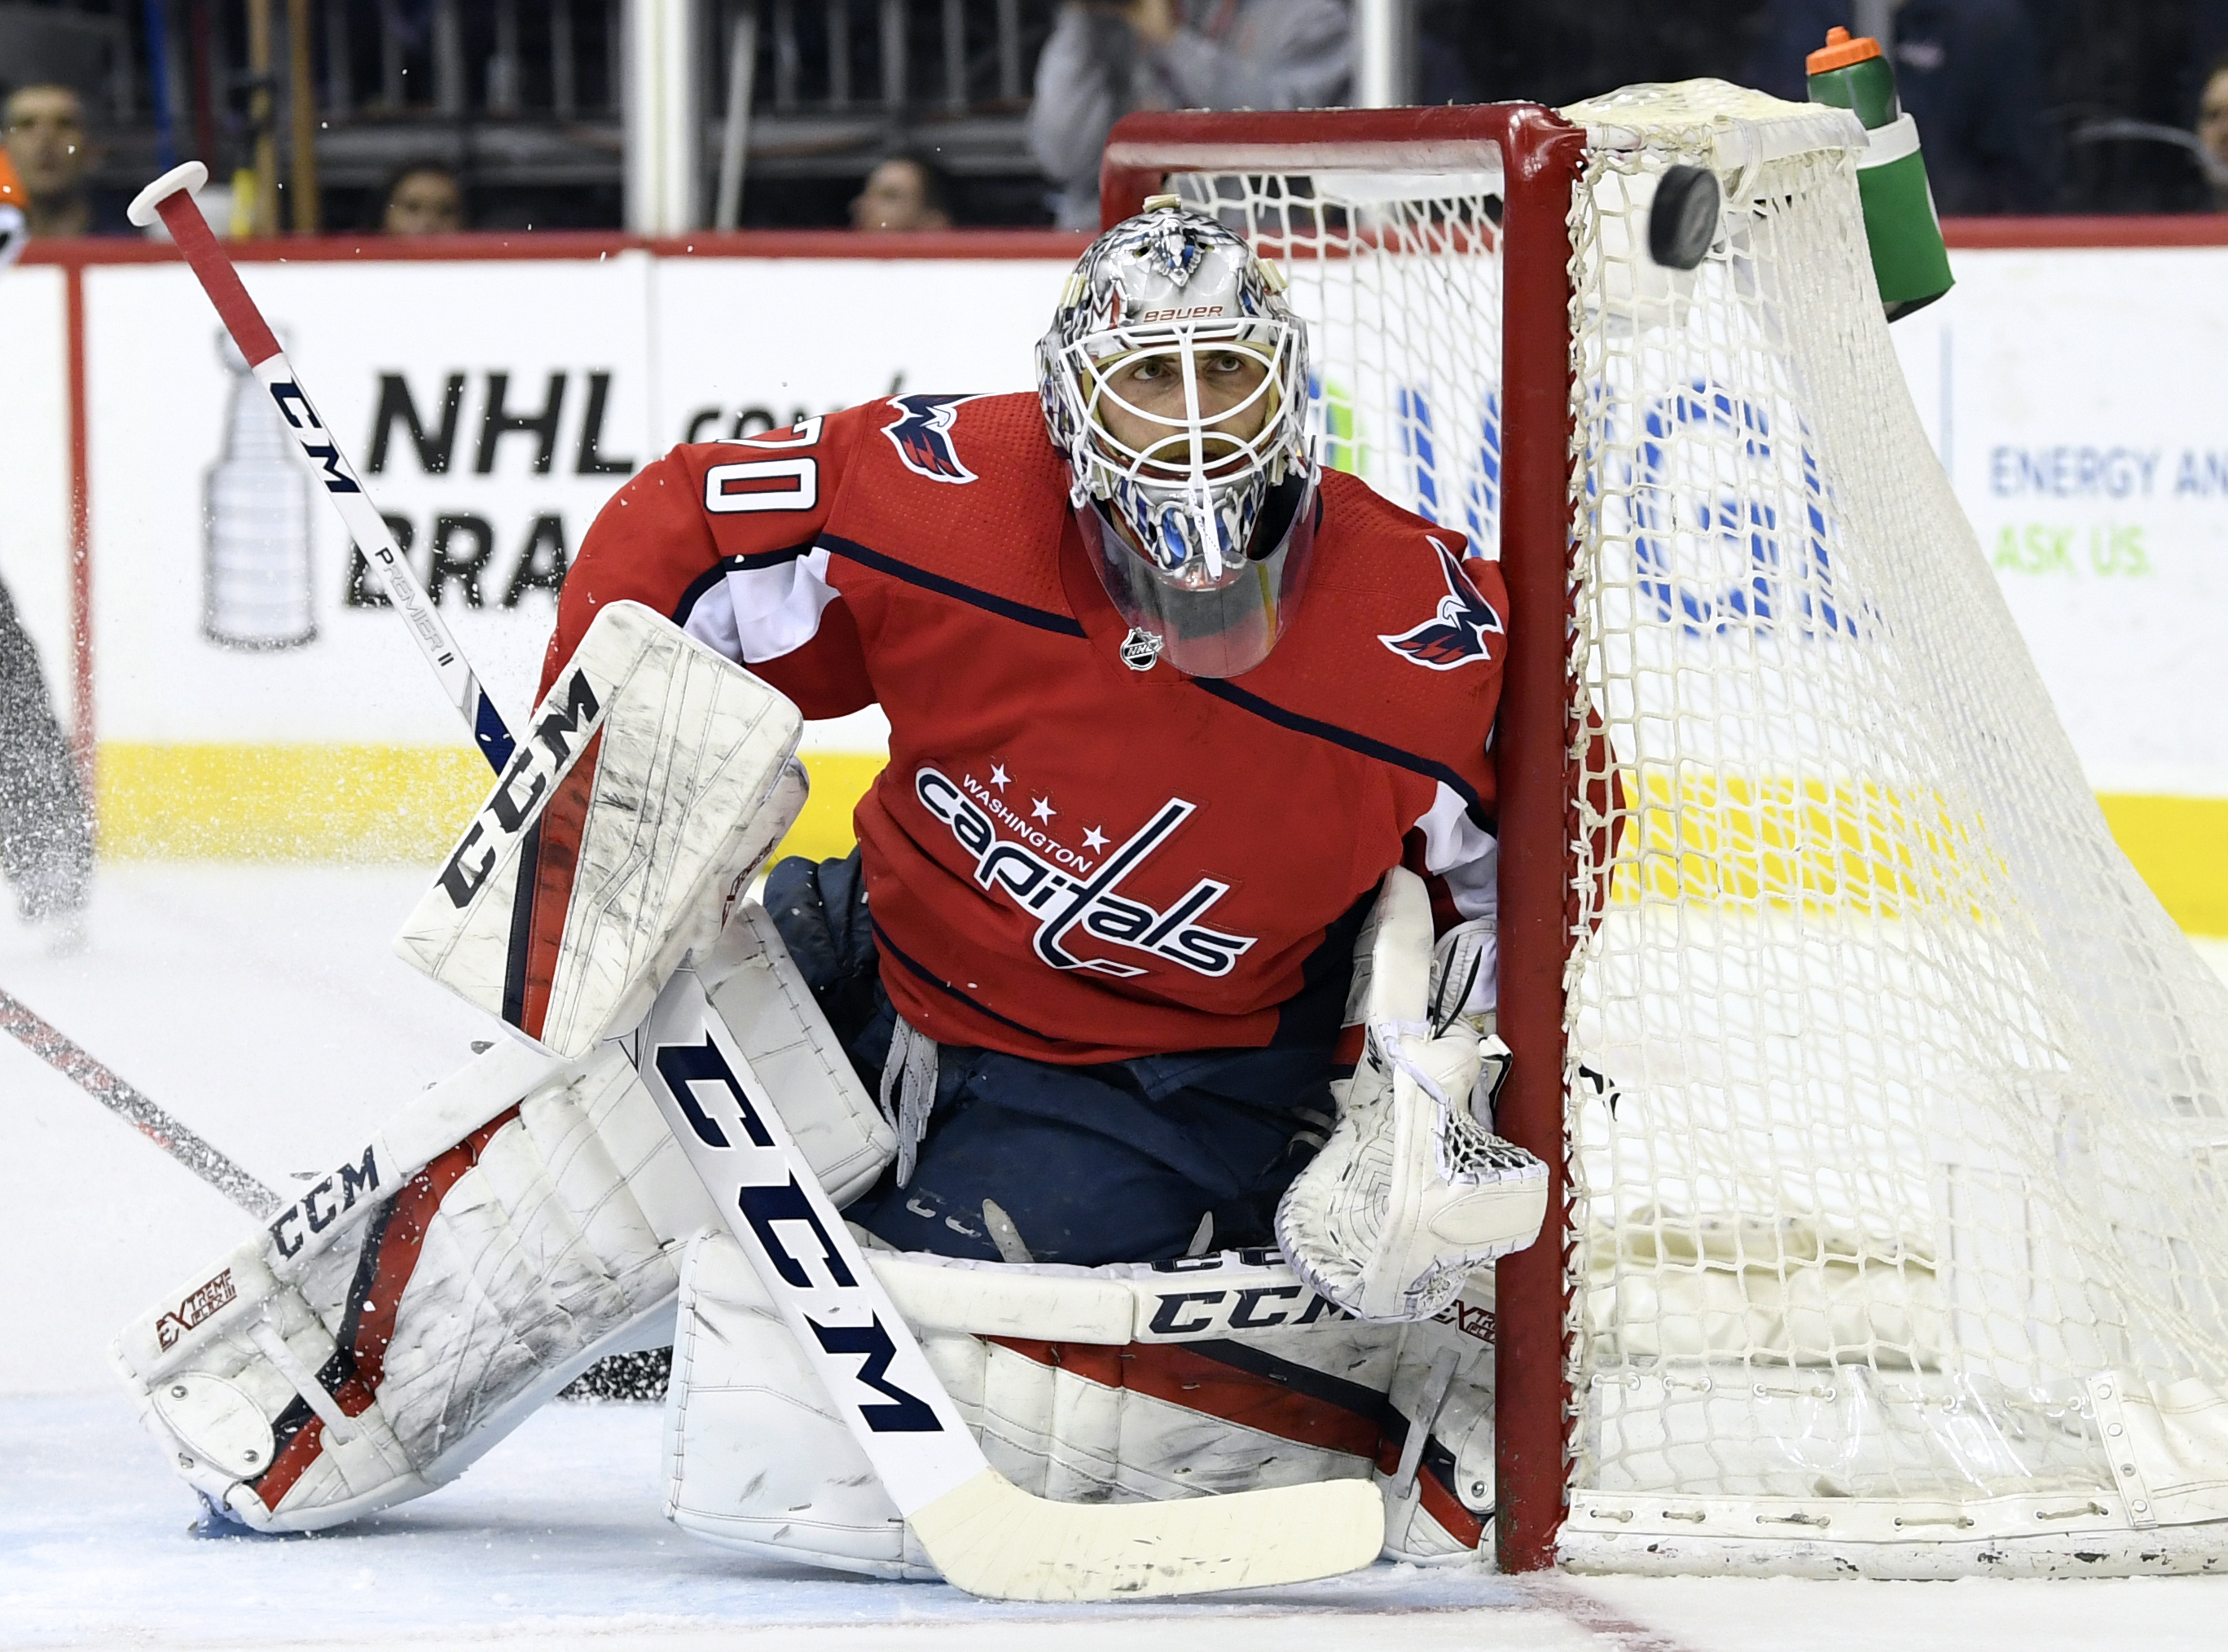 Copley Sent back to Hershey, so Holtby is Back!